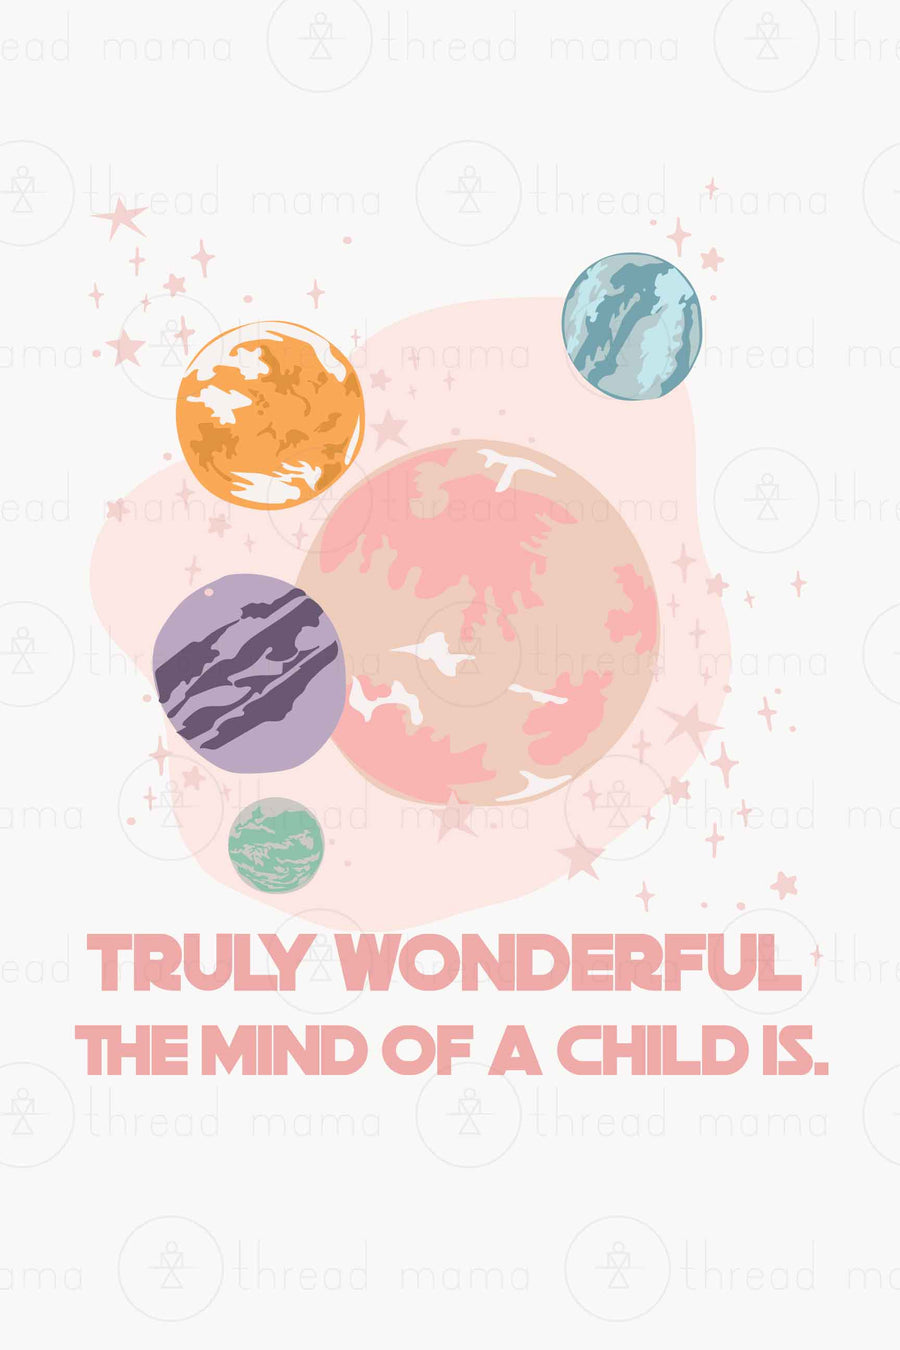 The Mind of a Child. (Printable Poster)